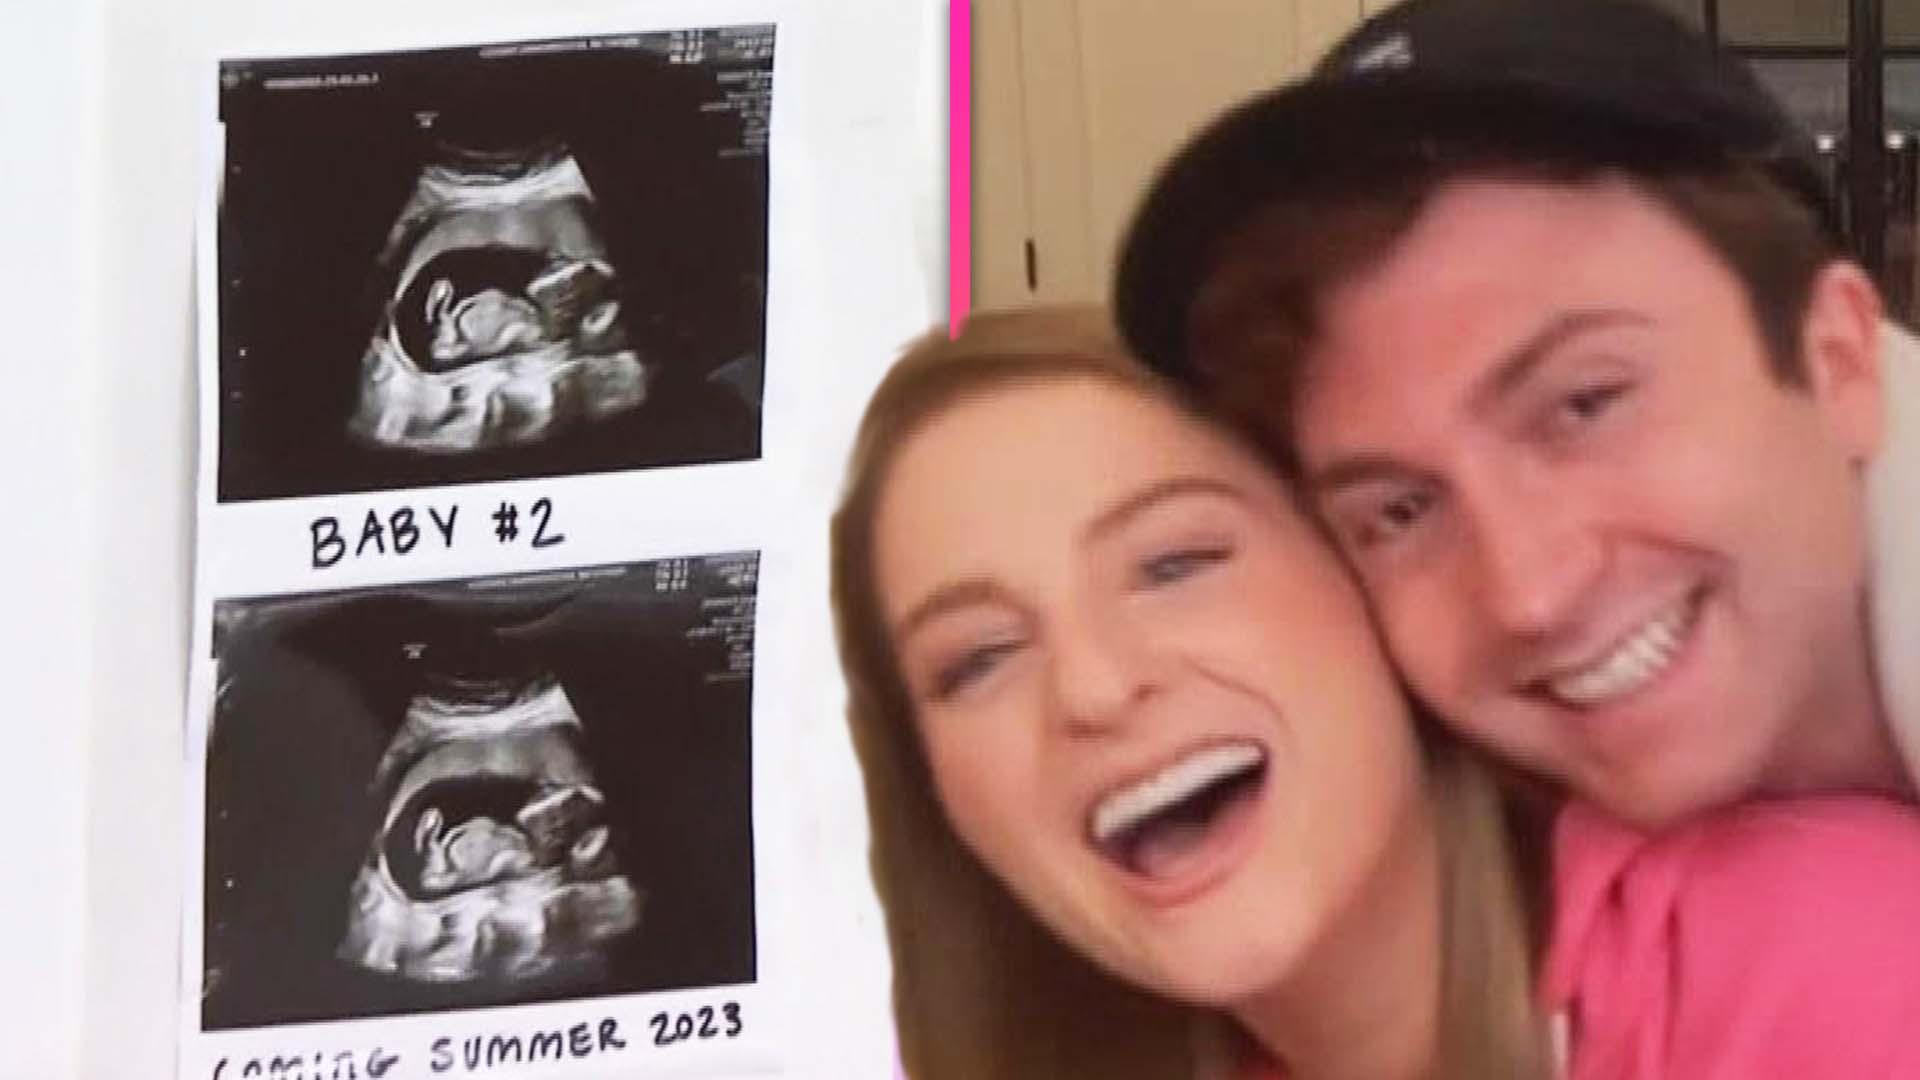 Meghan Trainor is expecting another baby boy this summer